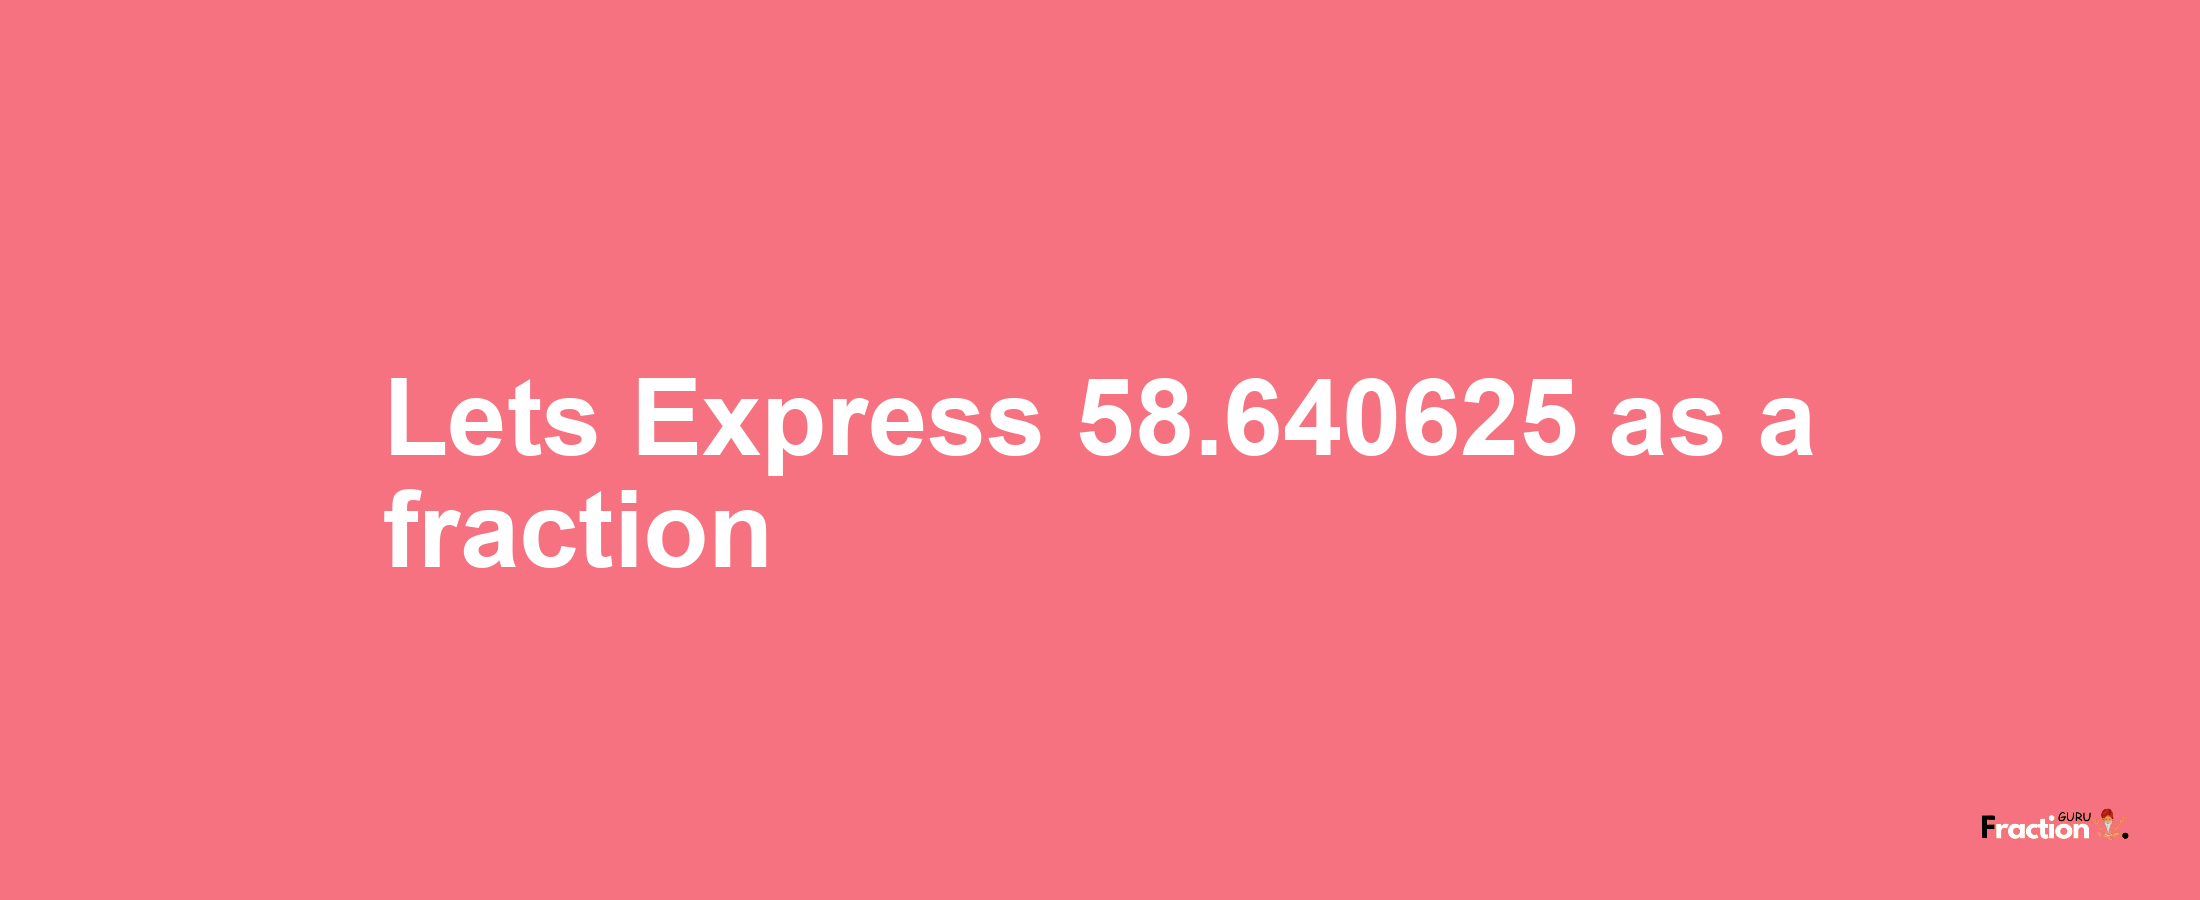 Lets Express 58.640625 as afraction